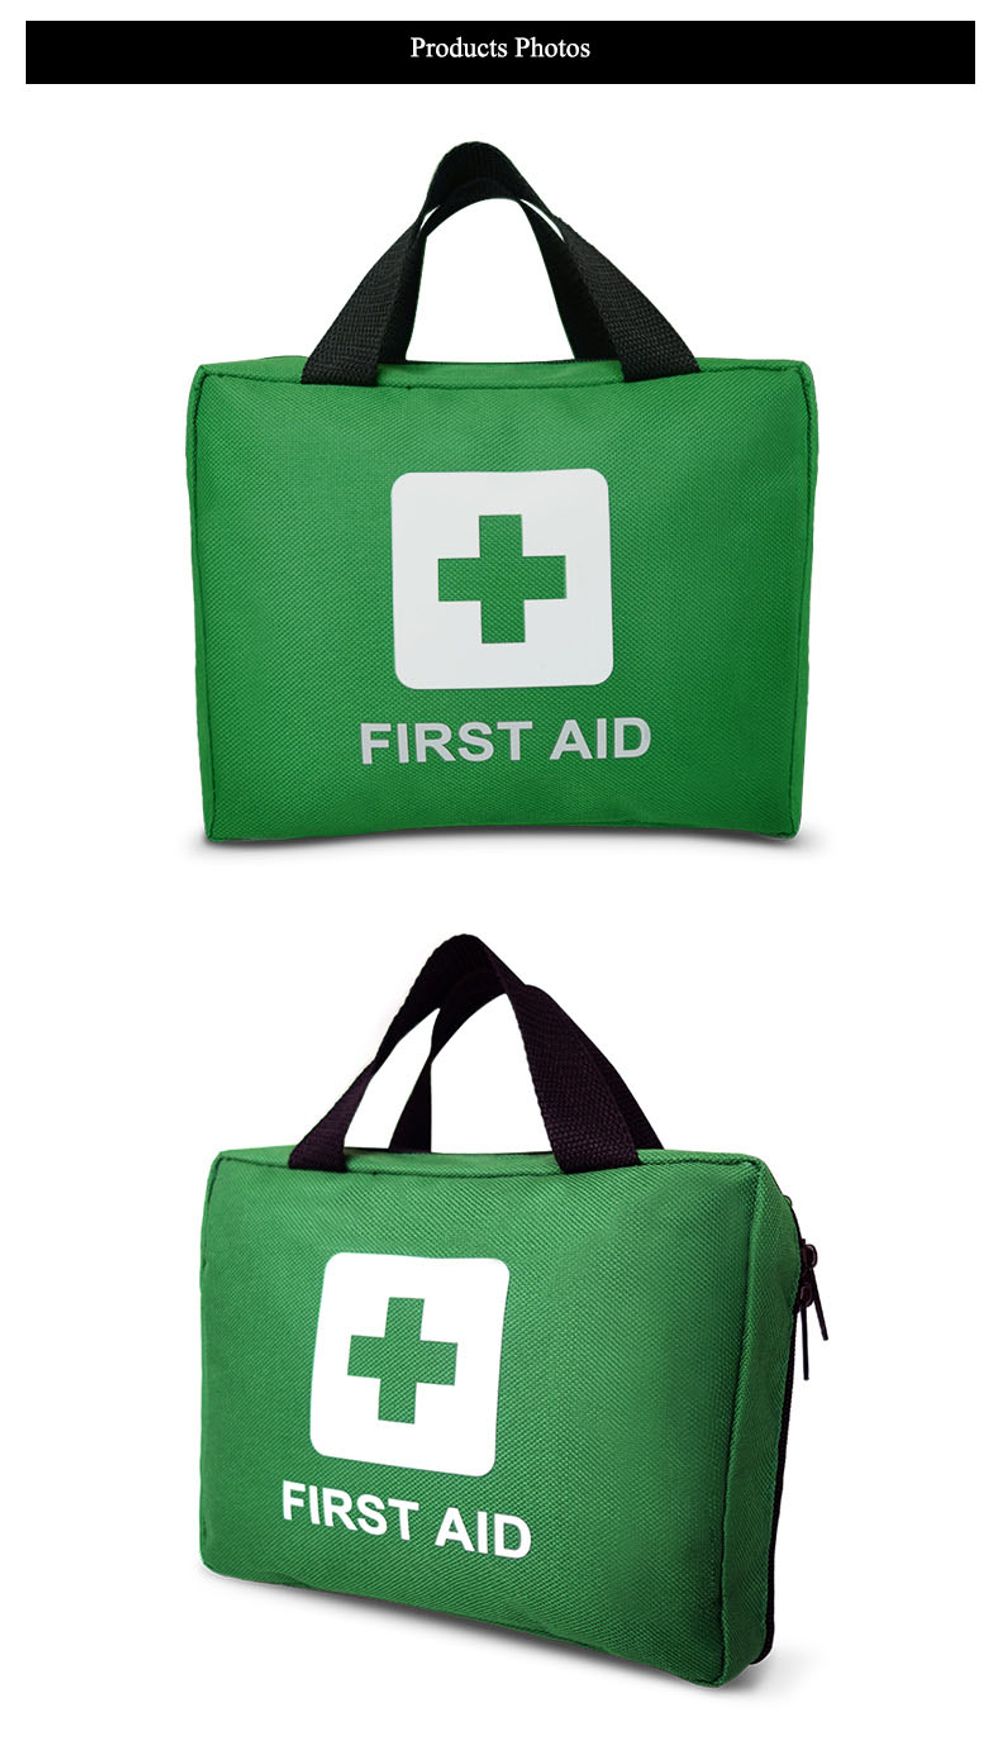 100-Piece Green First Aid Bag for Outdoor, Family, Sports & Travel Emergency Hemostasis & Survival with Full Accessories